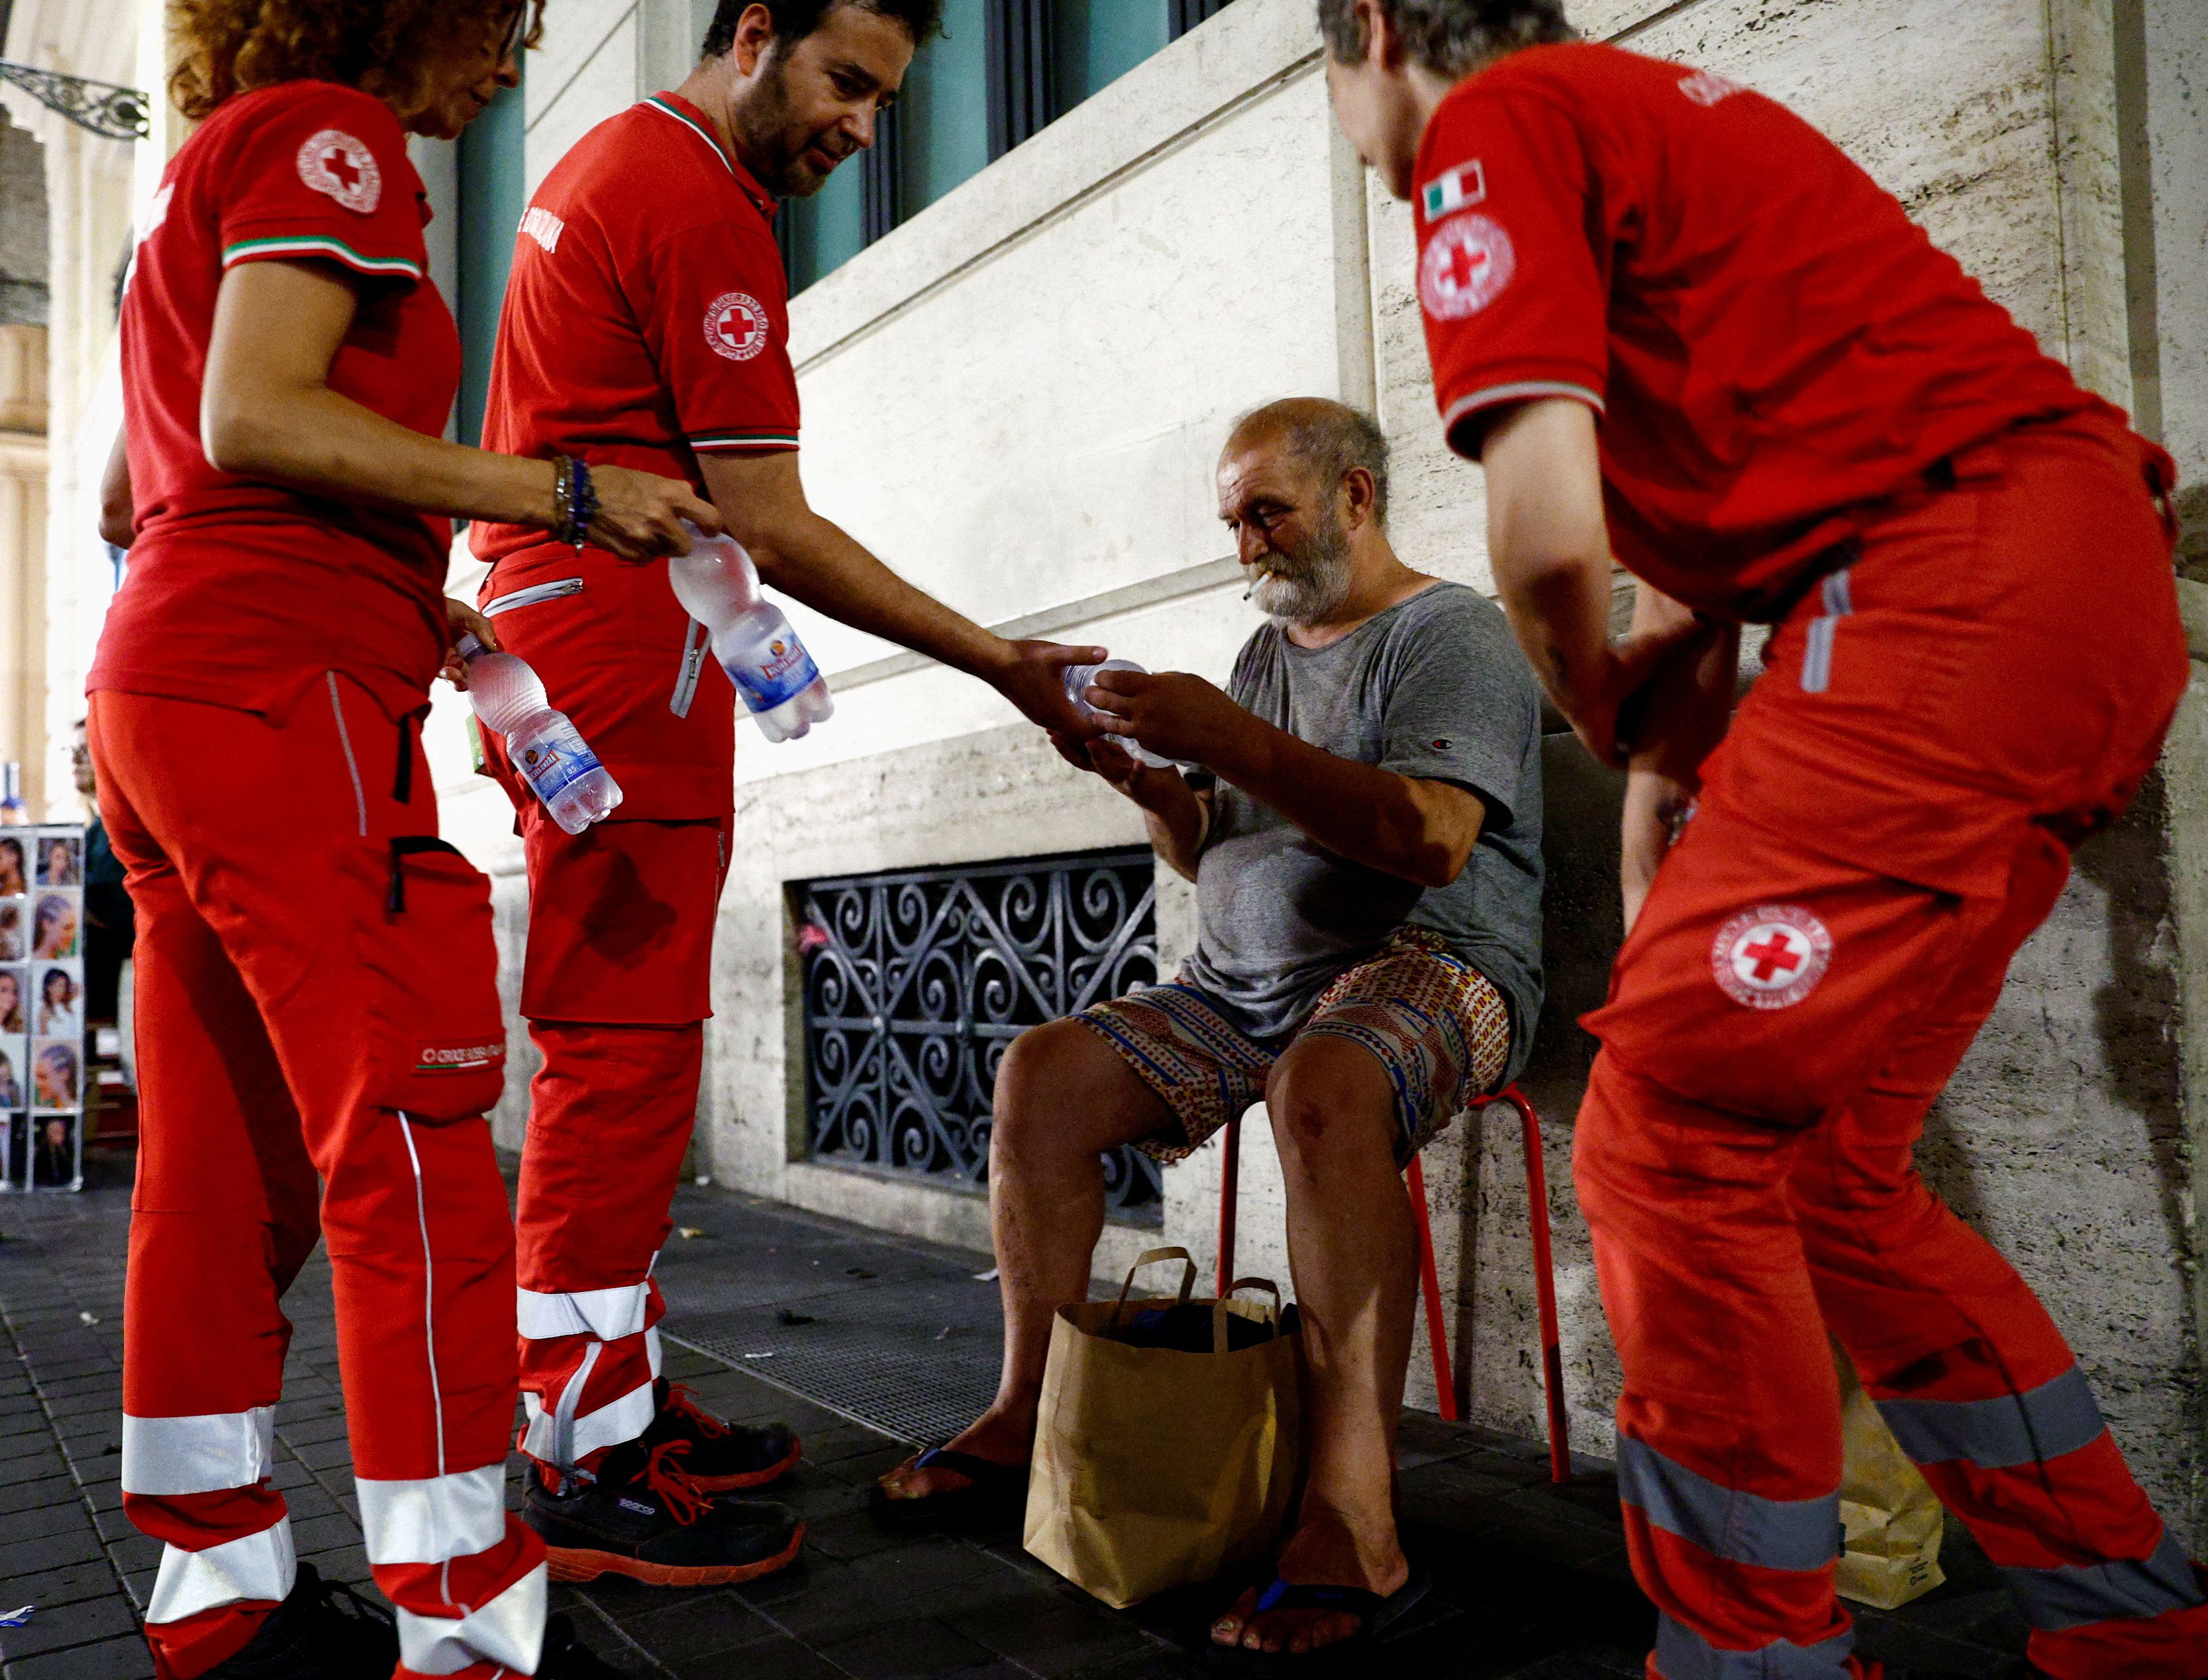 The heat waves in July put the lives of the most vulnerable people at greater risk: the Red Cross had to support people on the streets in Italy/ REUTERS/Guglielmo Mangiapane